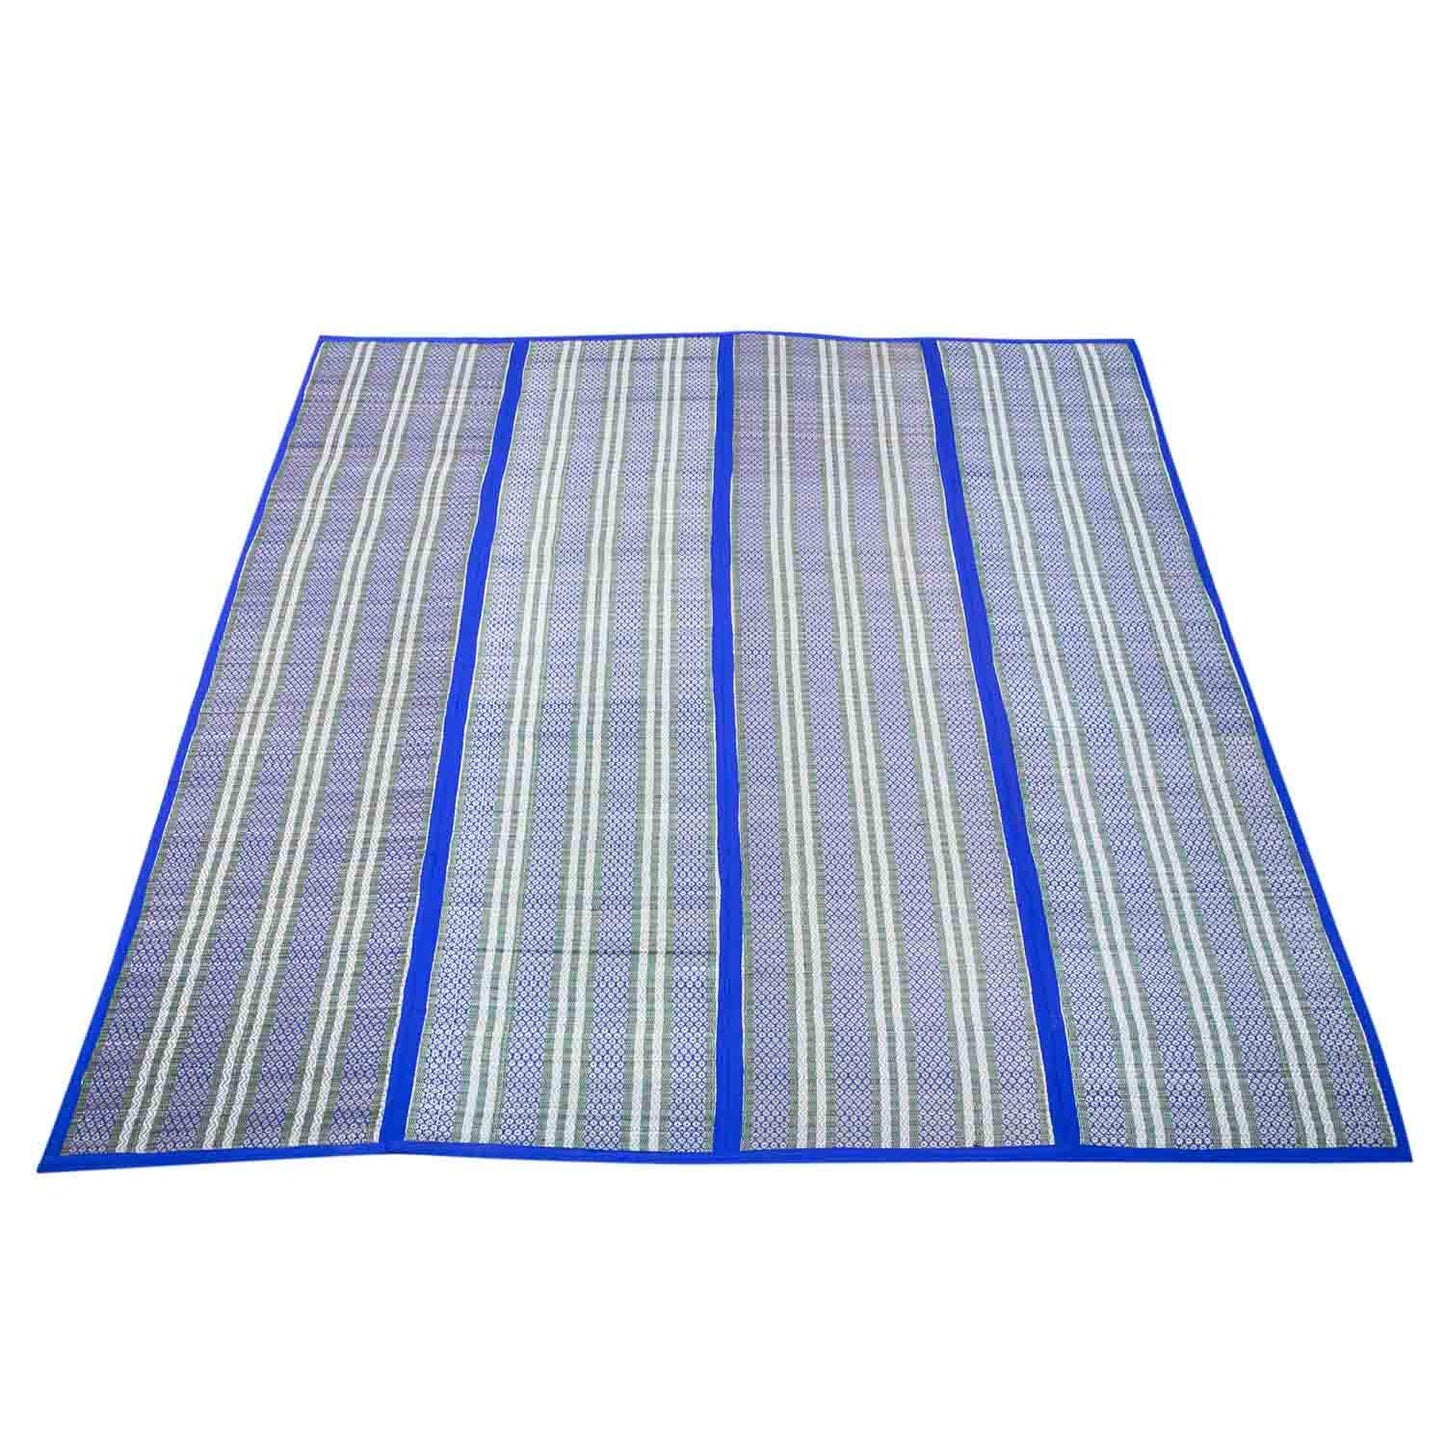 Designer Organic Chatai Mat Foldable made of Madurkathi Grass for Indoor and Outdoor Usages - T3-42